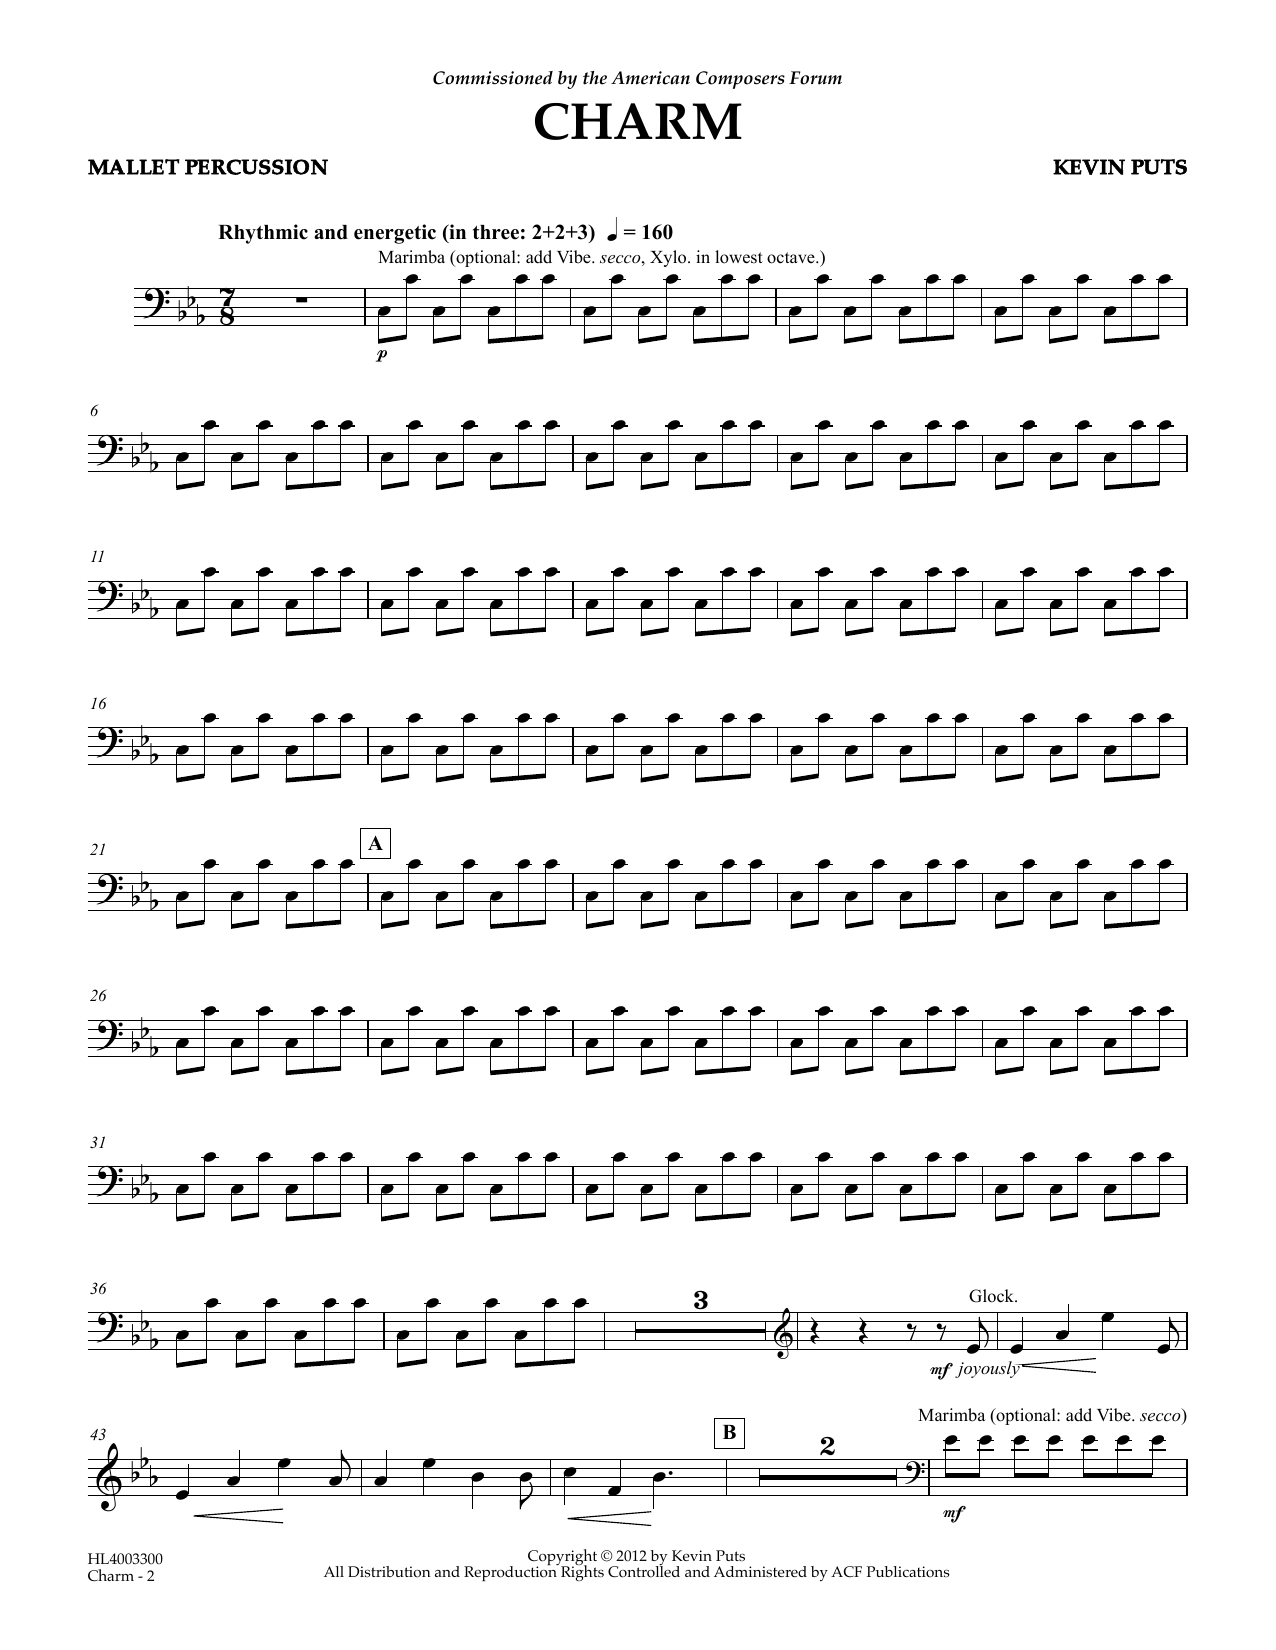 Download Kevin Puts Charm - Mallet Percussion Sheet Music